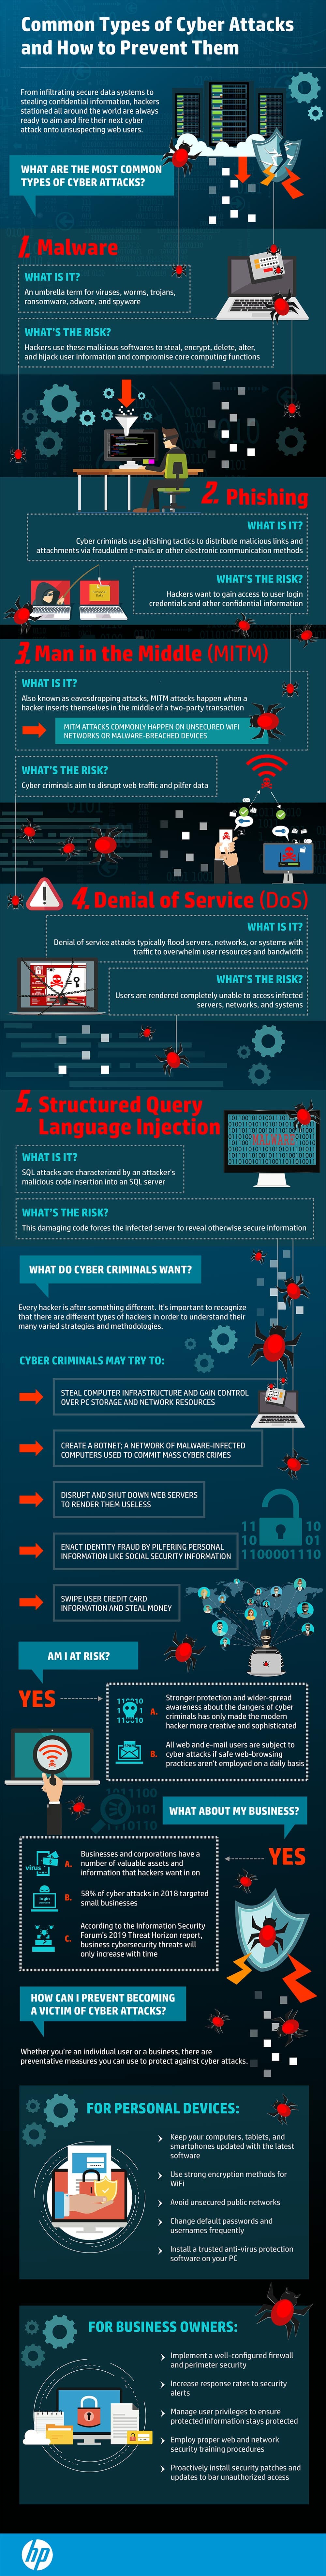 What Are the Most Common Types of Cyber Attacks?